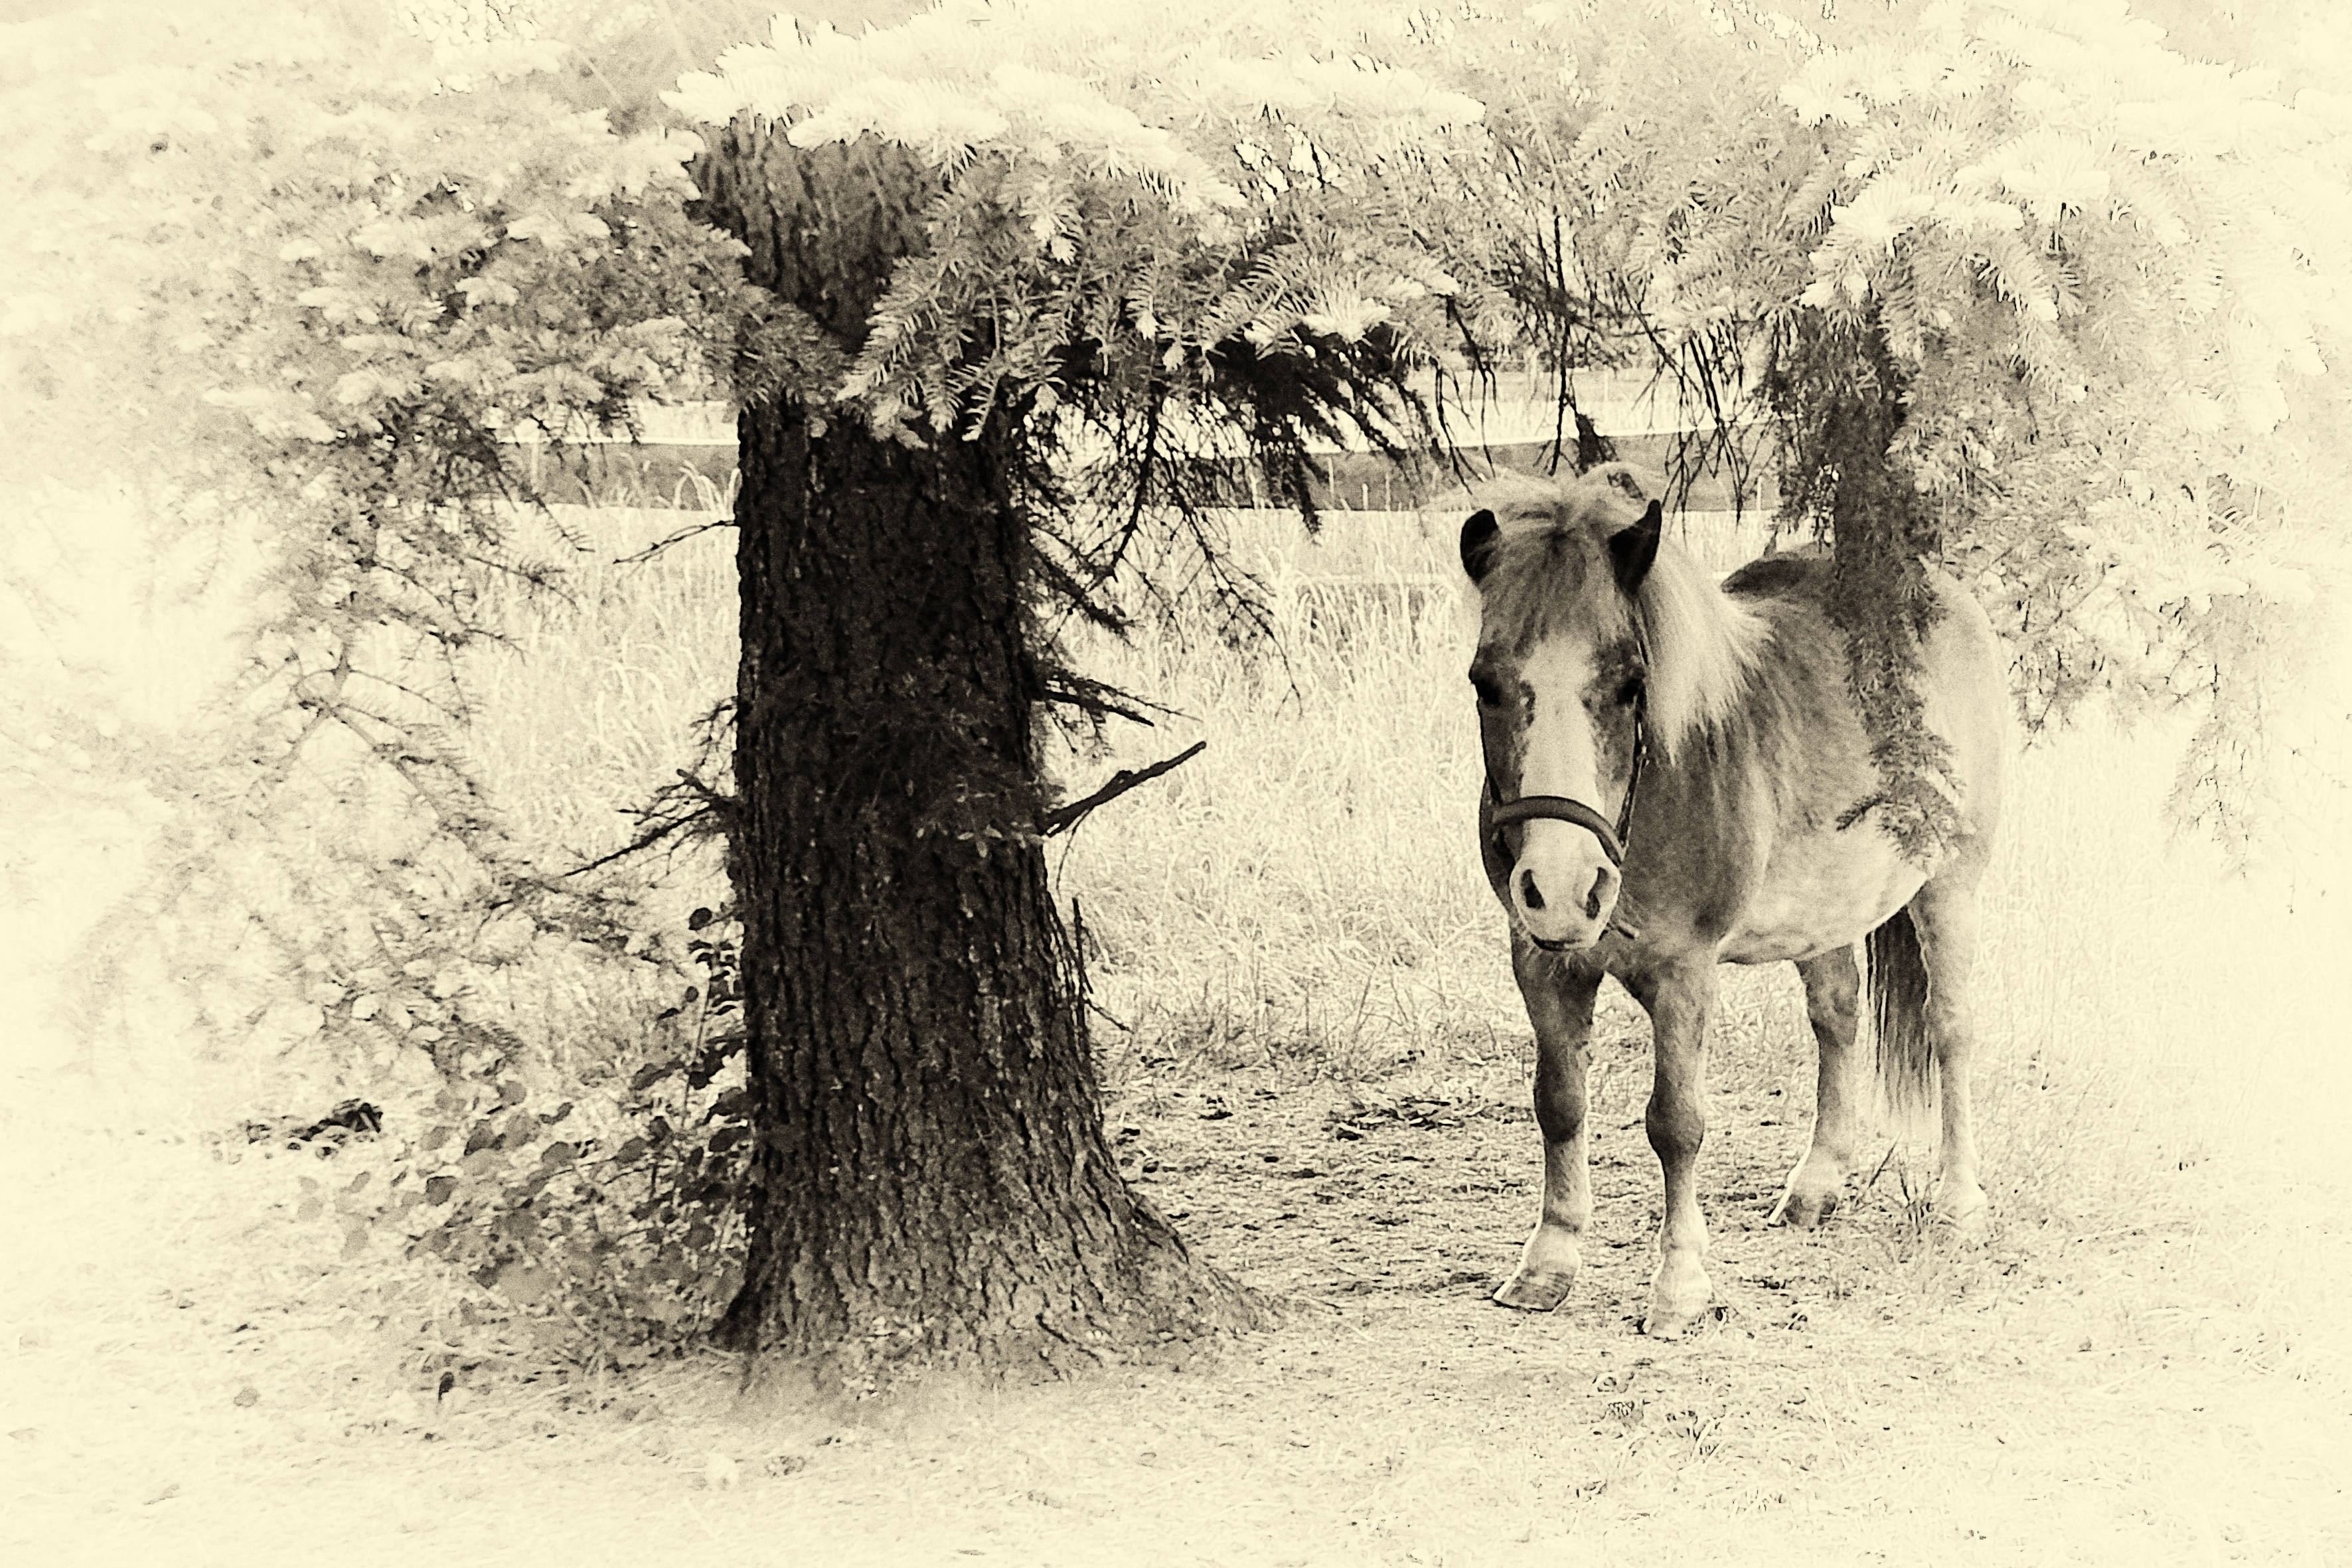 brown and white horse standing near a tree